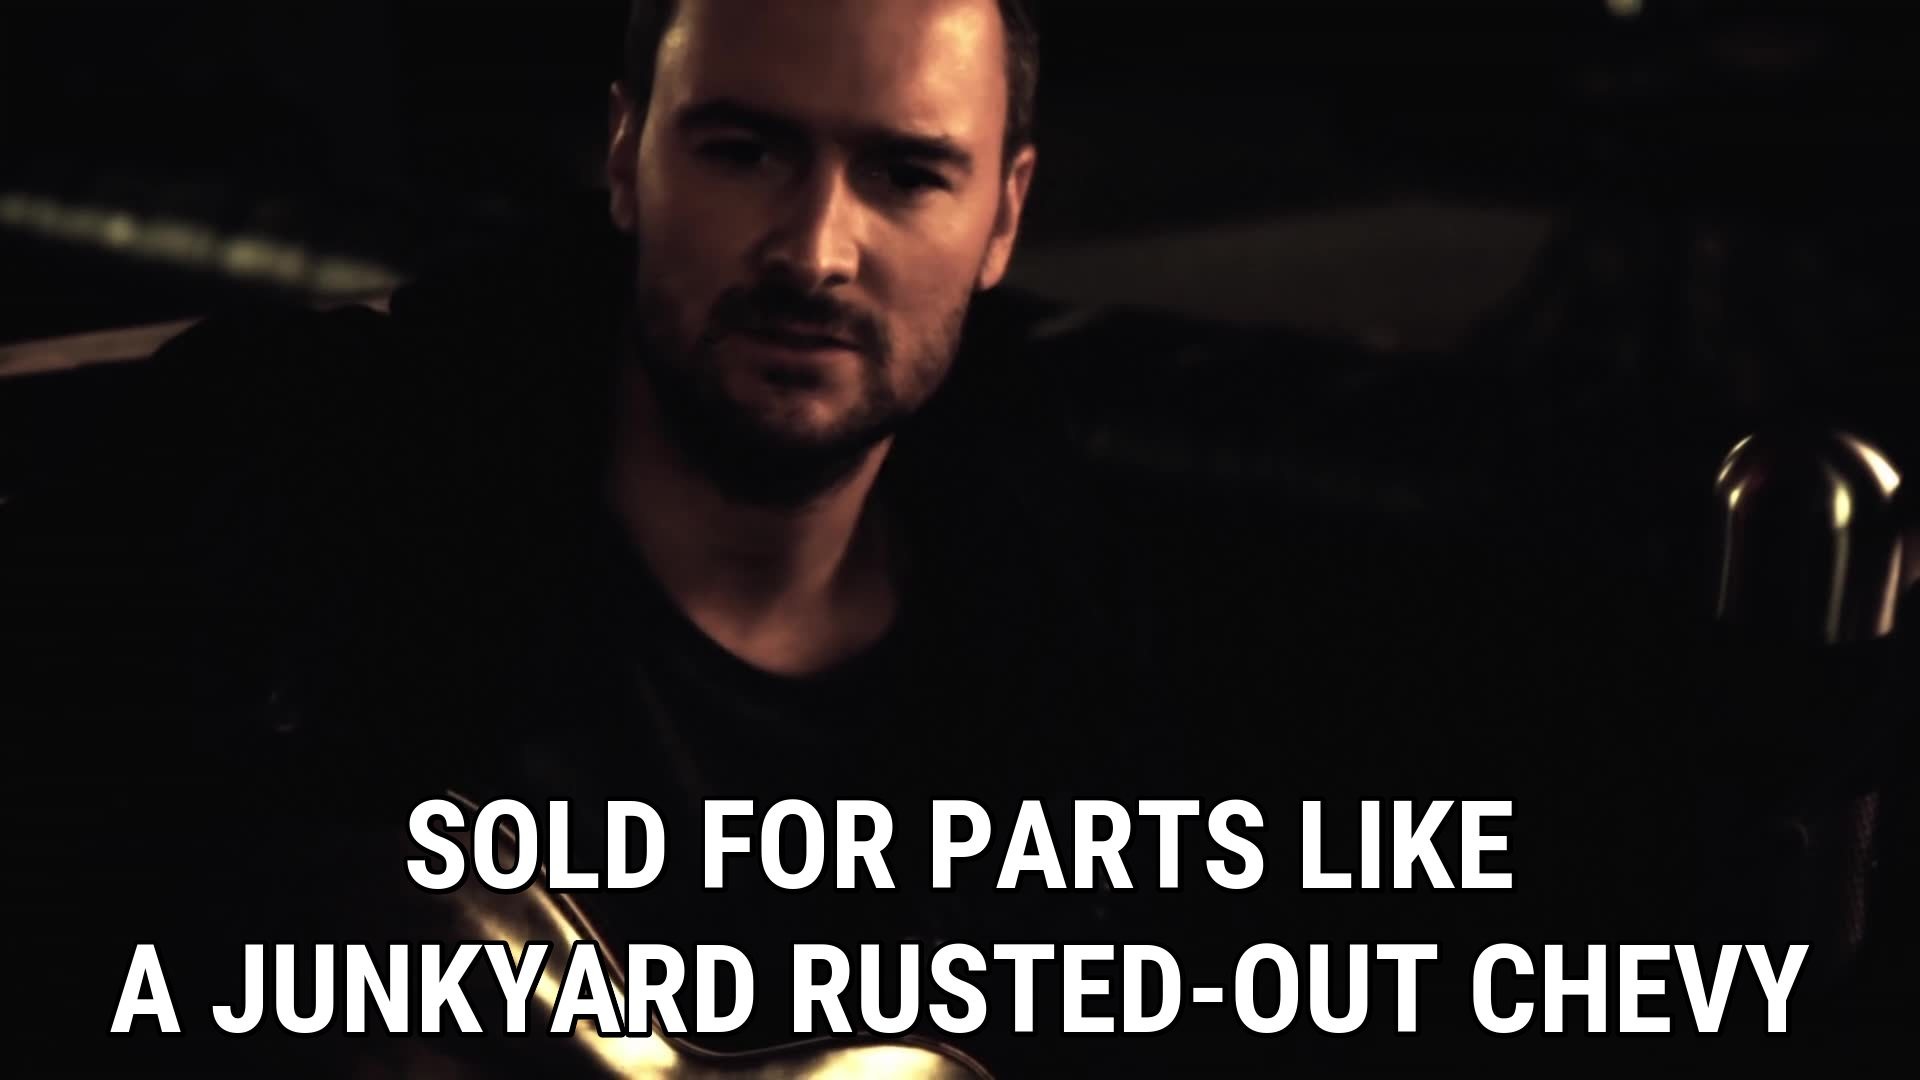 1920x1080 Sold for parts like a junkyard rusted-out Chevy / Eric Church